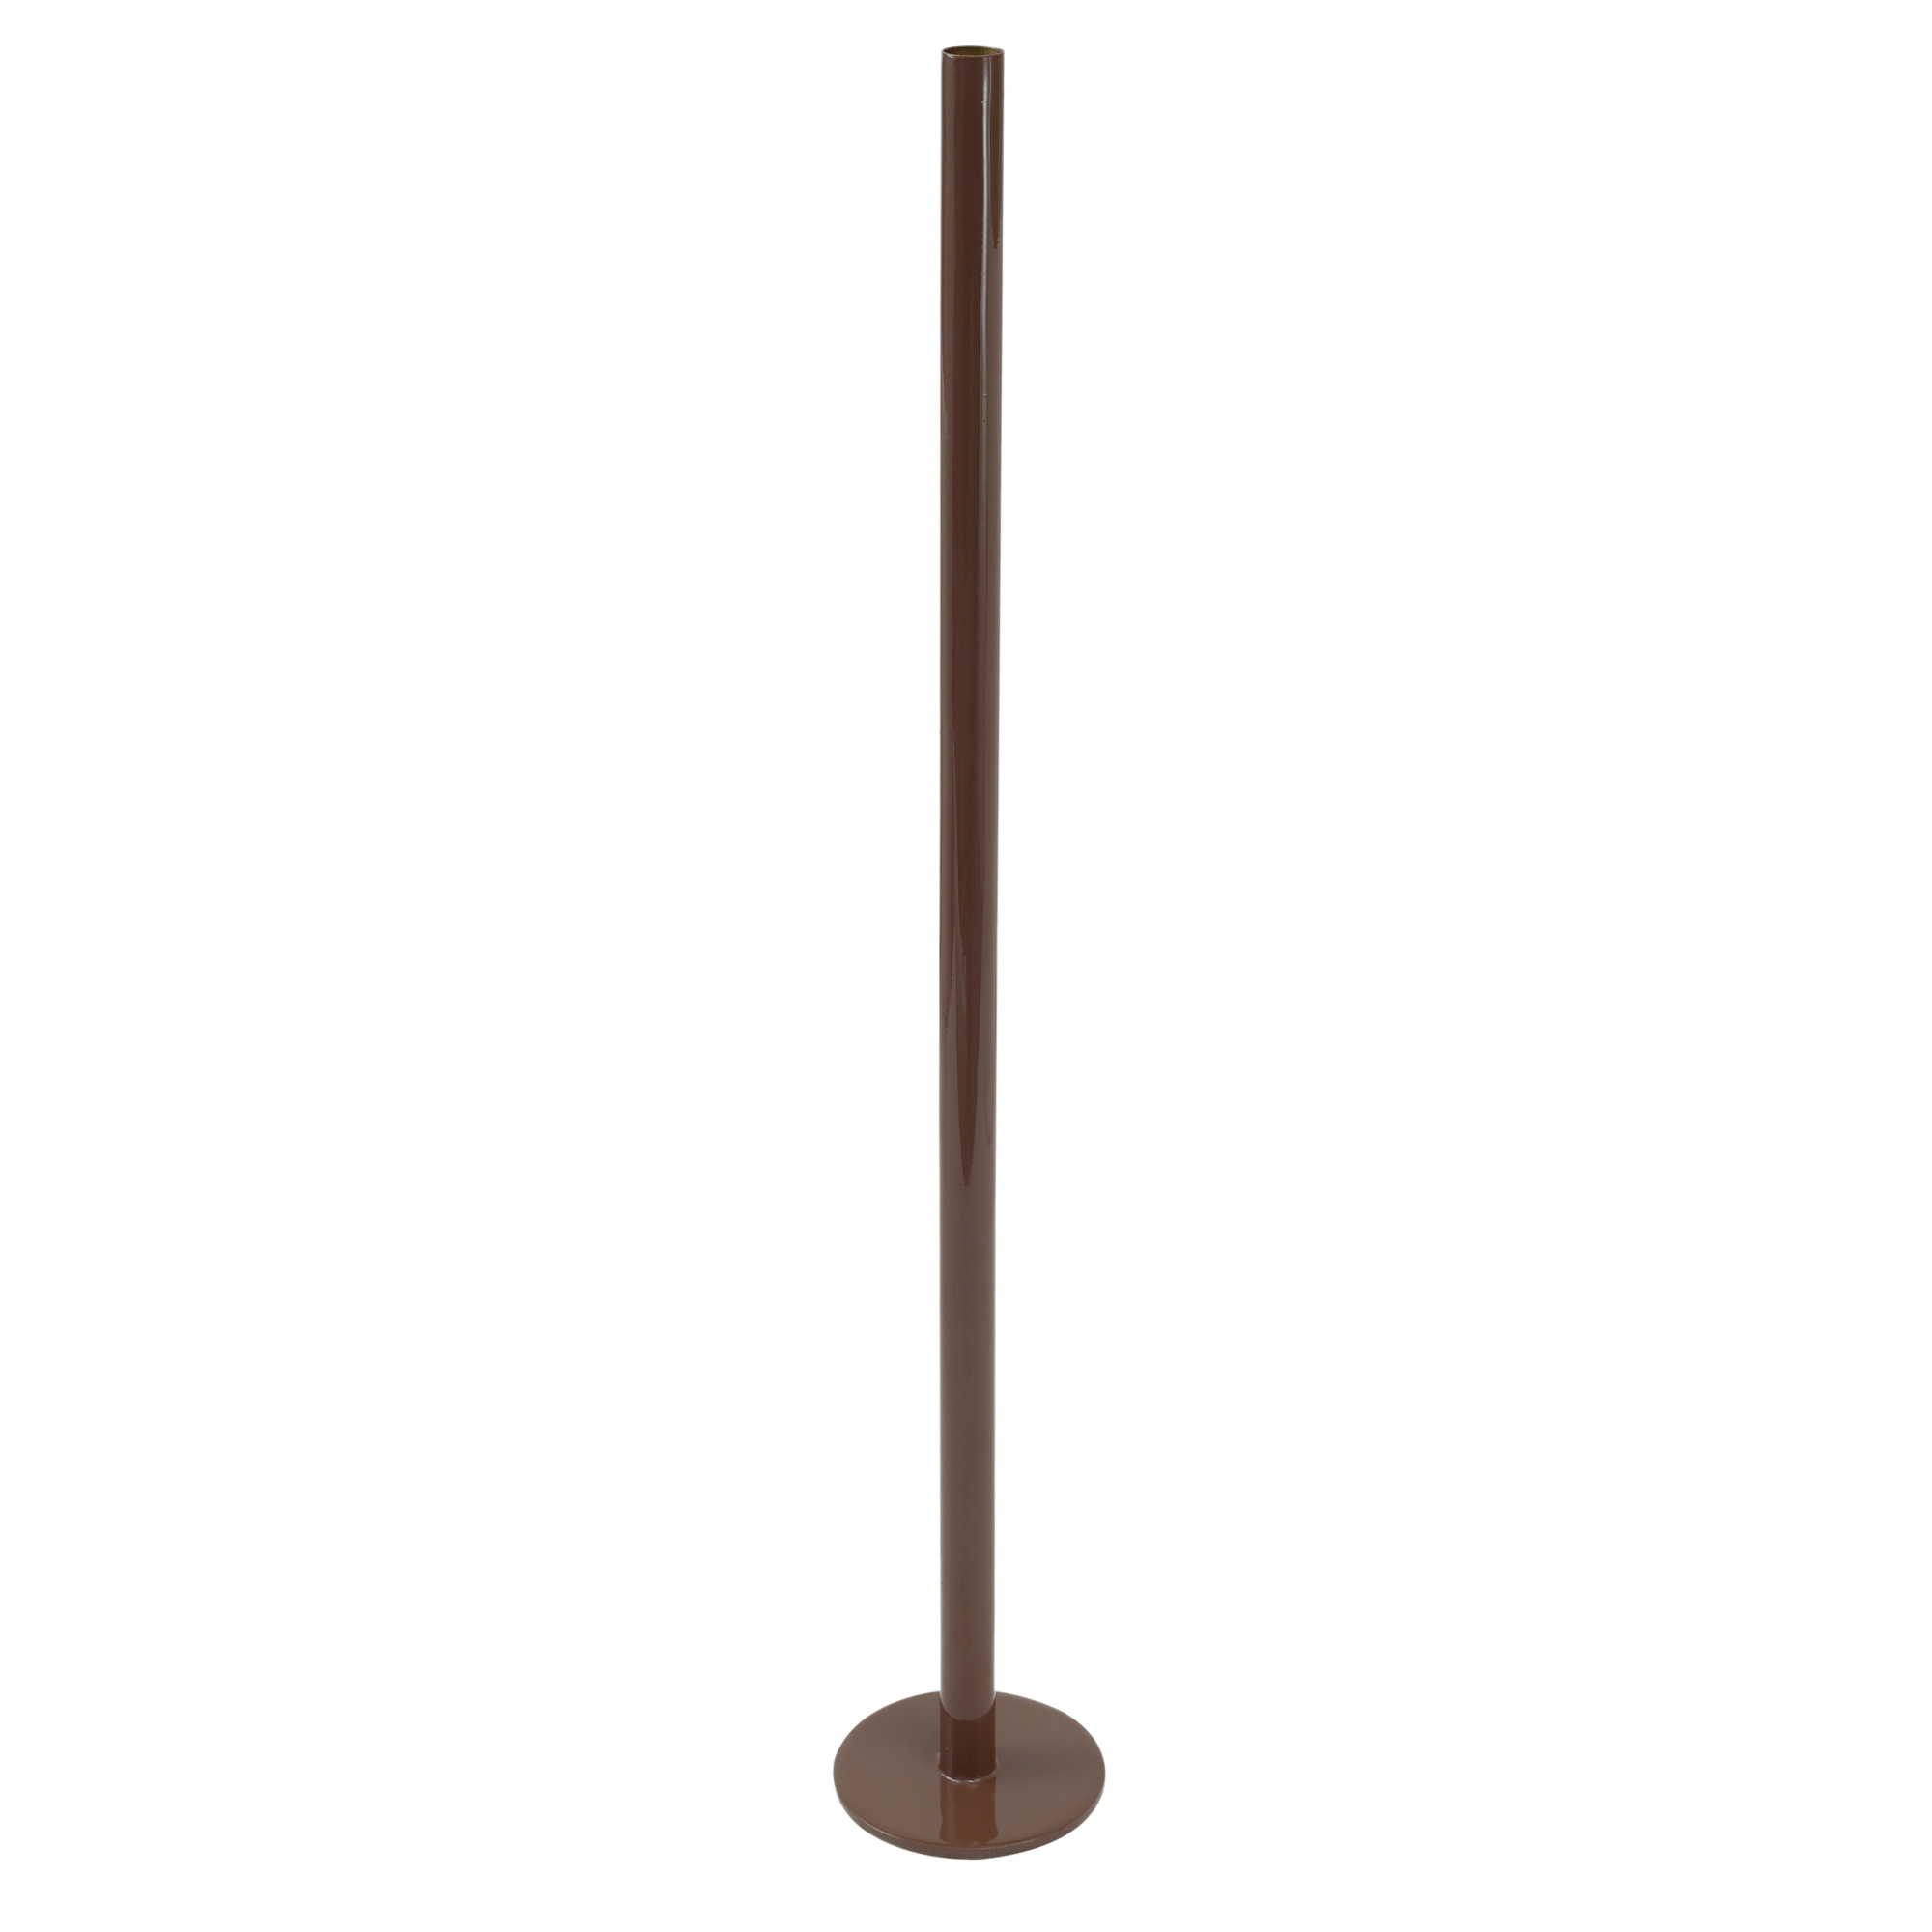 Marnix Red iron candleholder straight up high